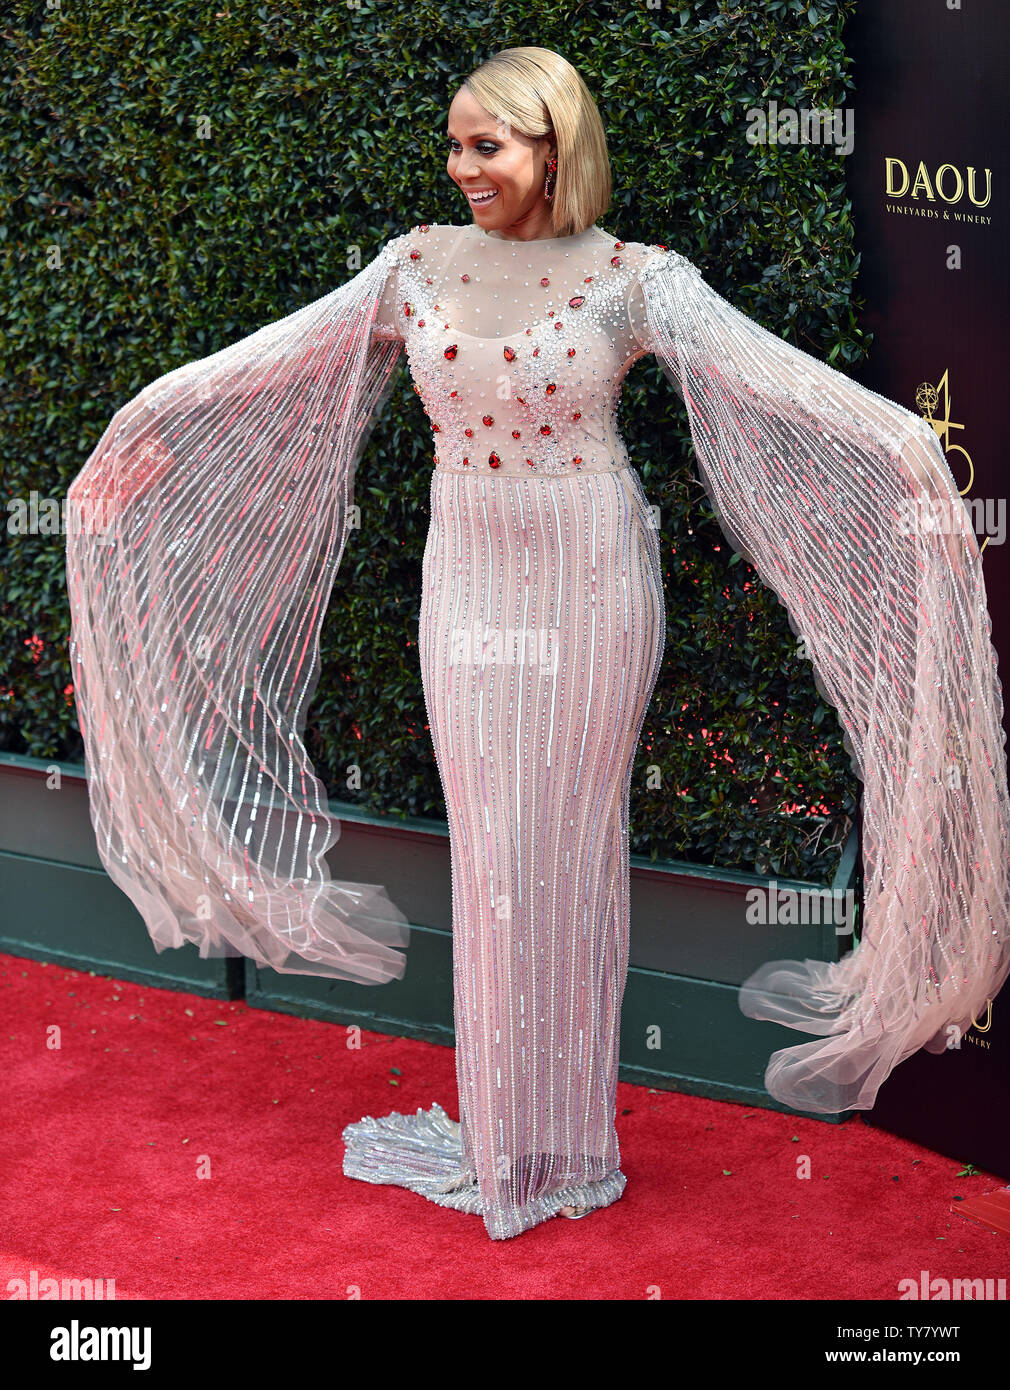 Deborah Cox arrives on the red carpet for the 45th Annual Daytime Emmy Awards at the Pasadena Civic Auditorium in Pasadena, California on April 29, 2018. Photo by Chris Chew/UPI Stock Photo